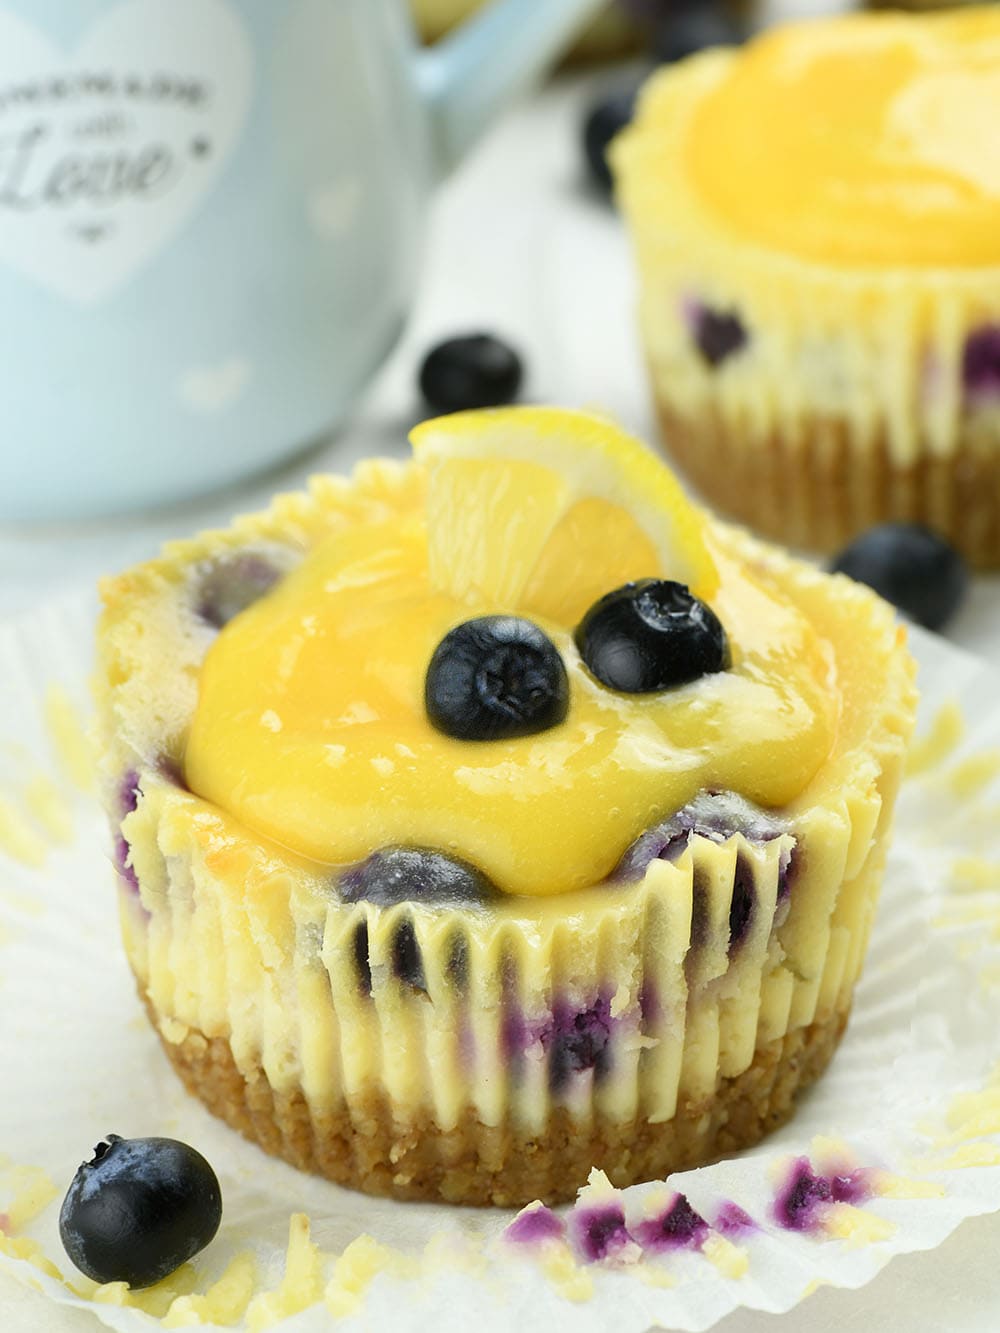 Mini Lemon Blueberry Cheesecakes with Lemon Curd and garnished with two blueberries and lemon.